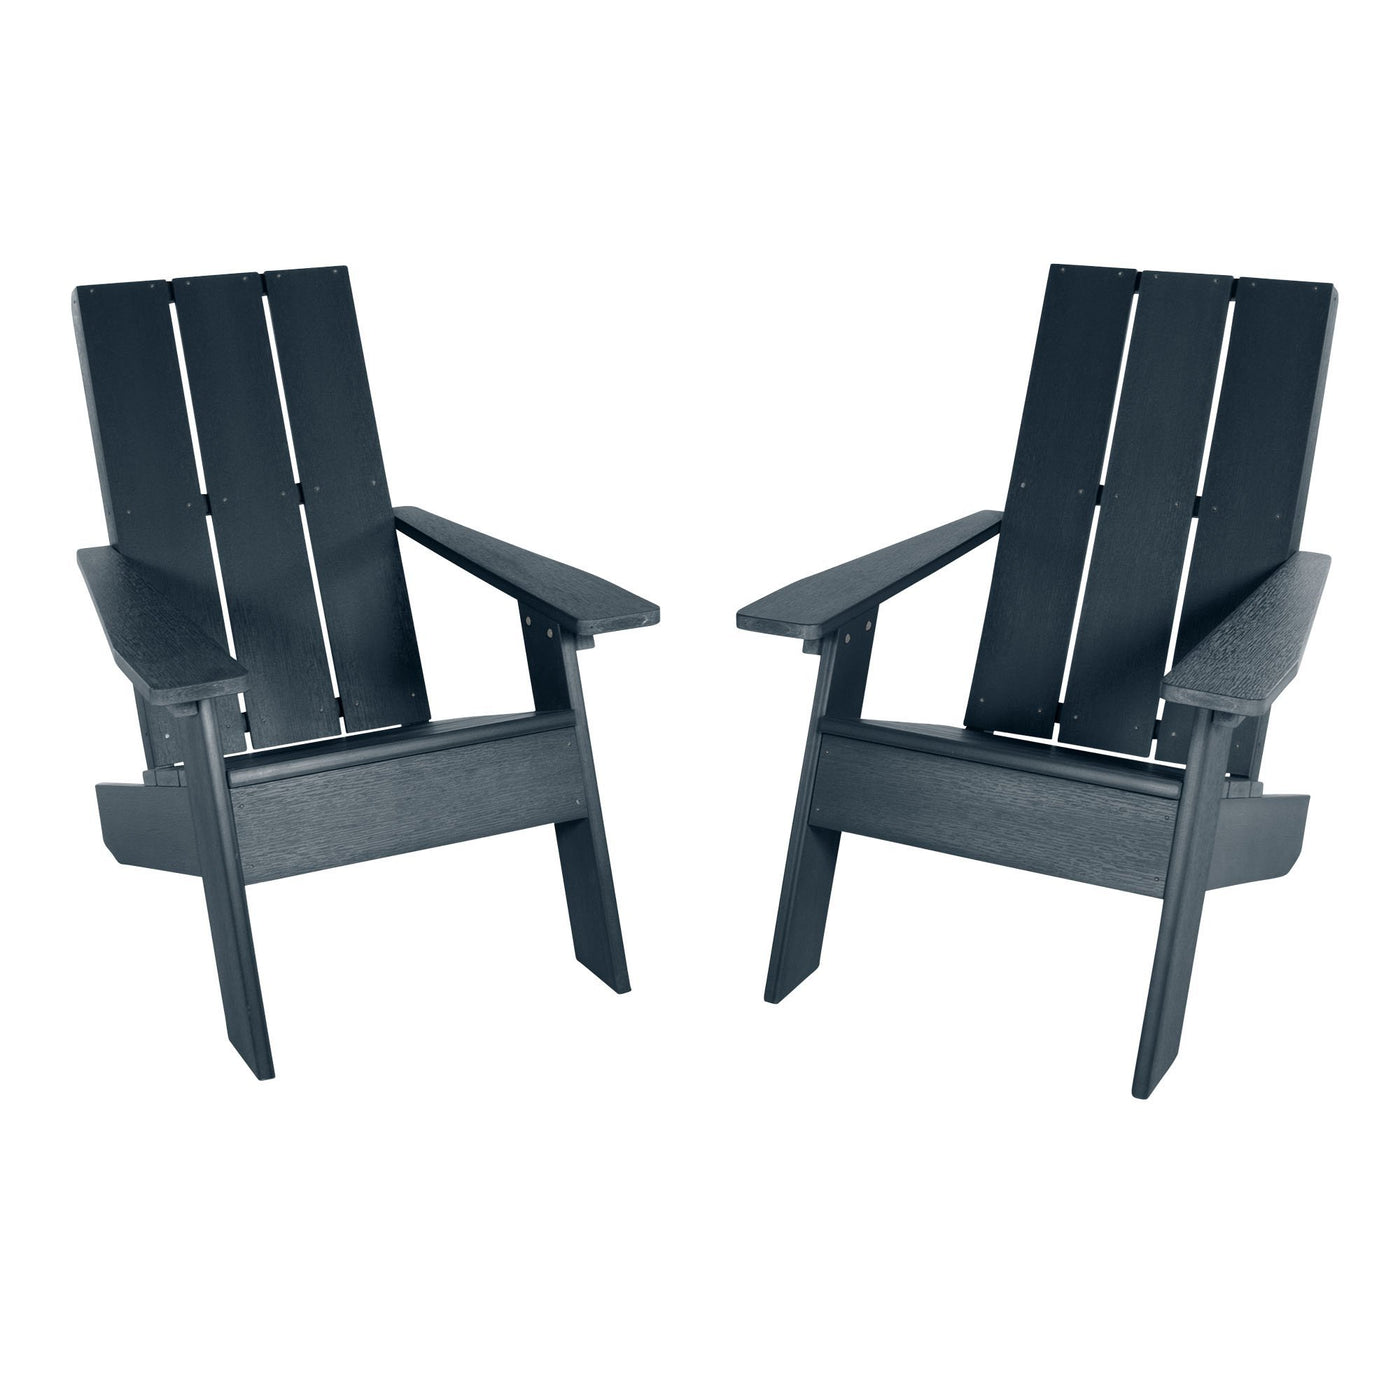 Two Italica Adirondack chairs in Federal Blue 